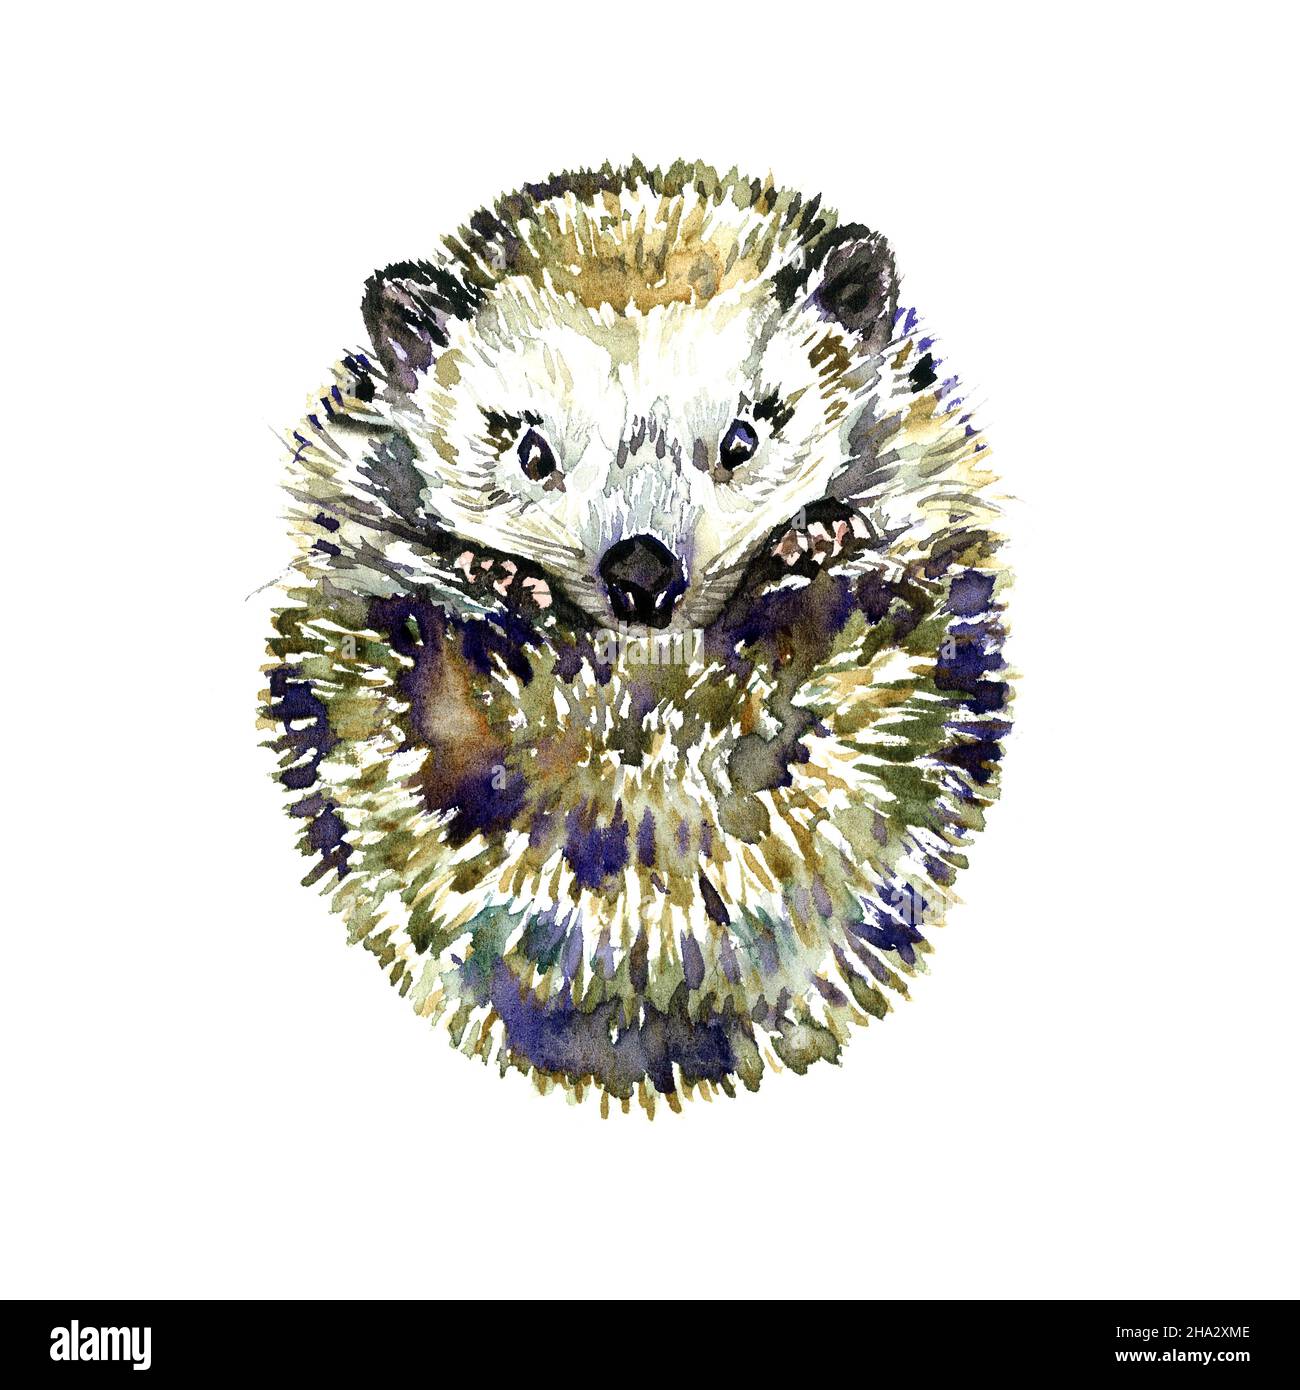 South african hedgehog, hand painted watercolor illustration Stock Photo